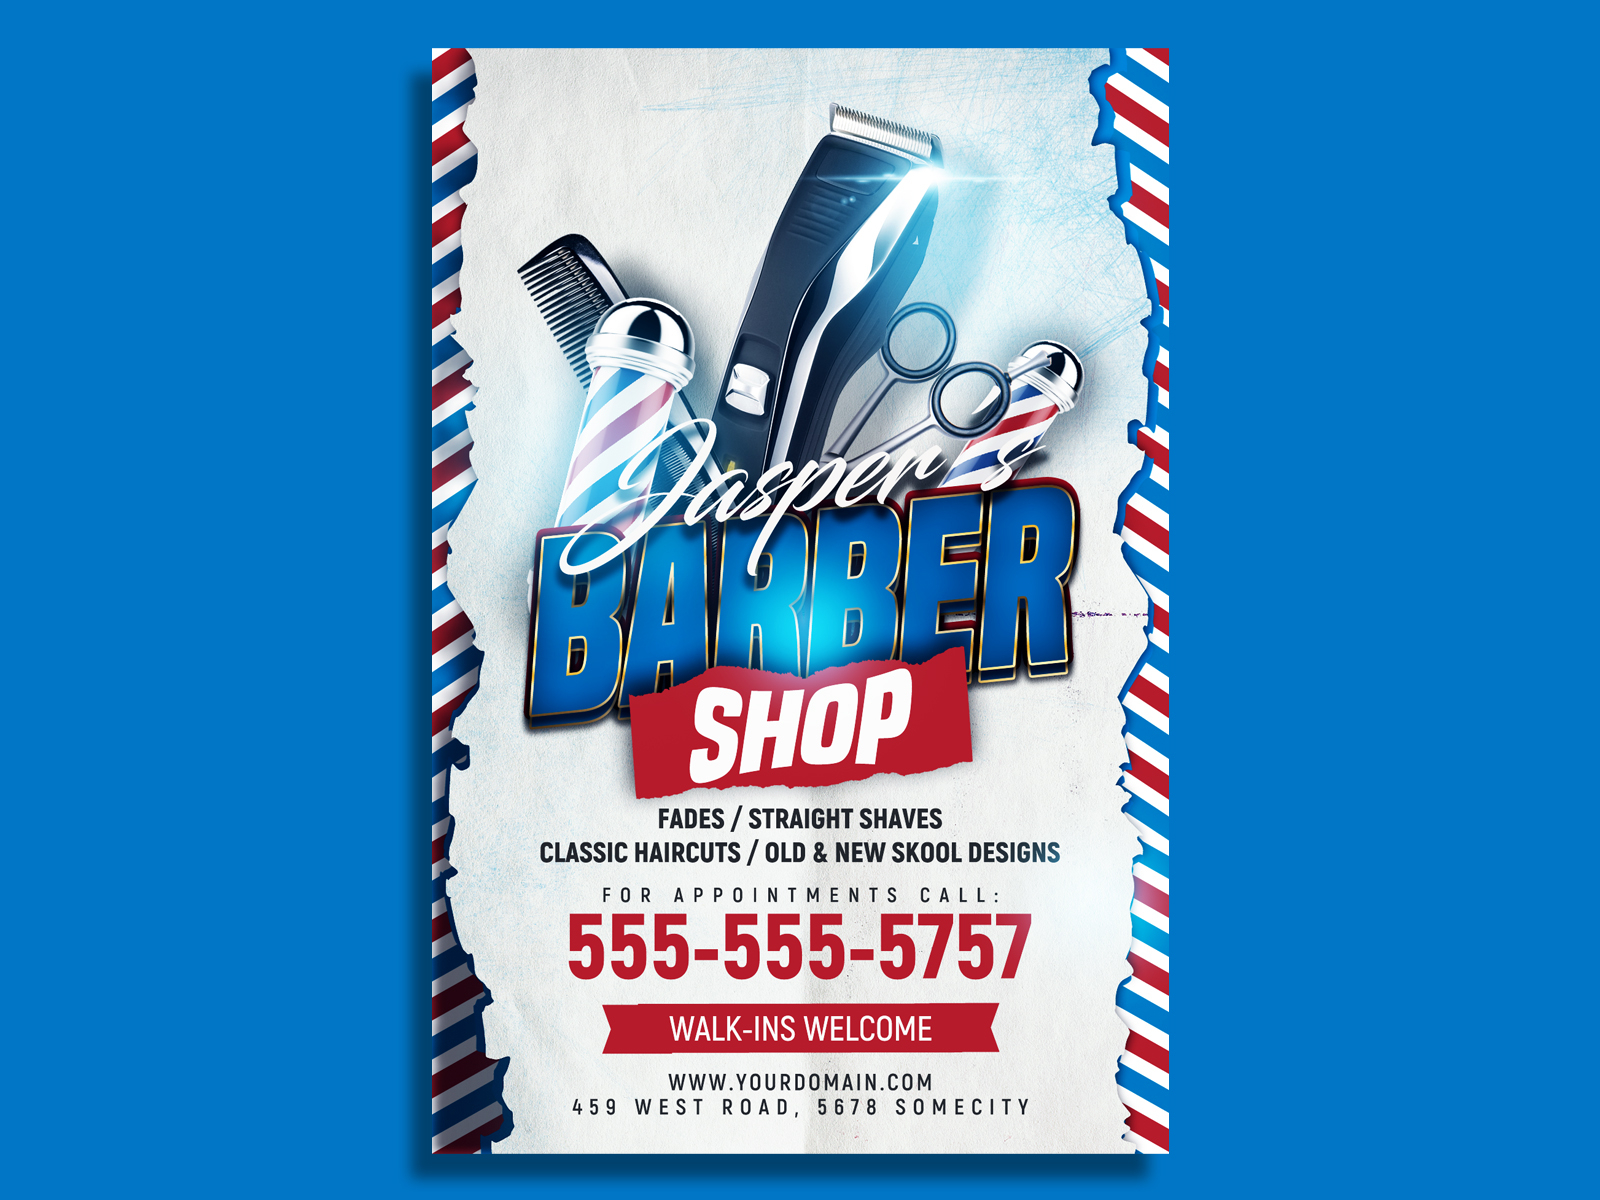 Barber Shop Flyer Template by Hotpin on Dribbble